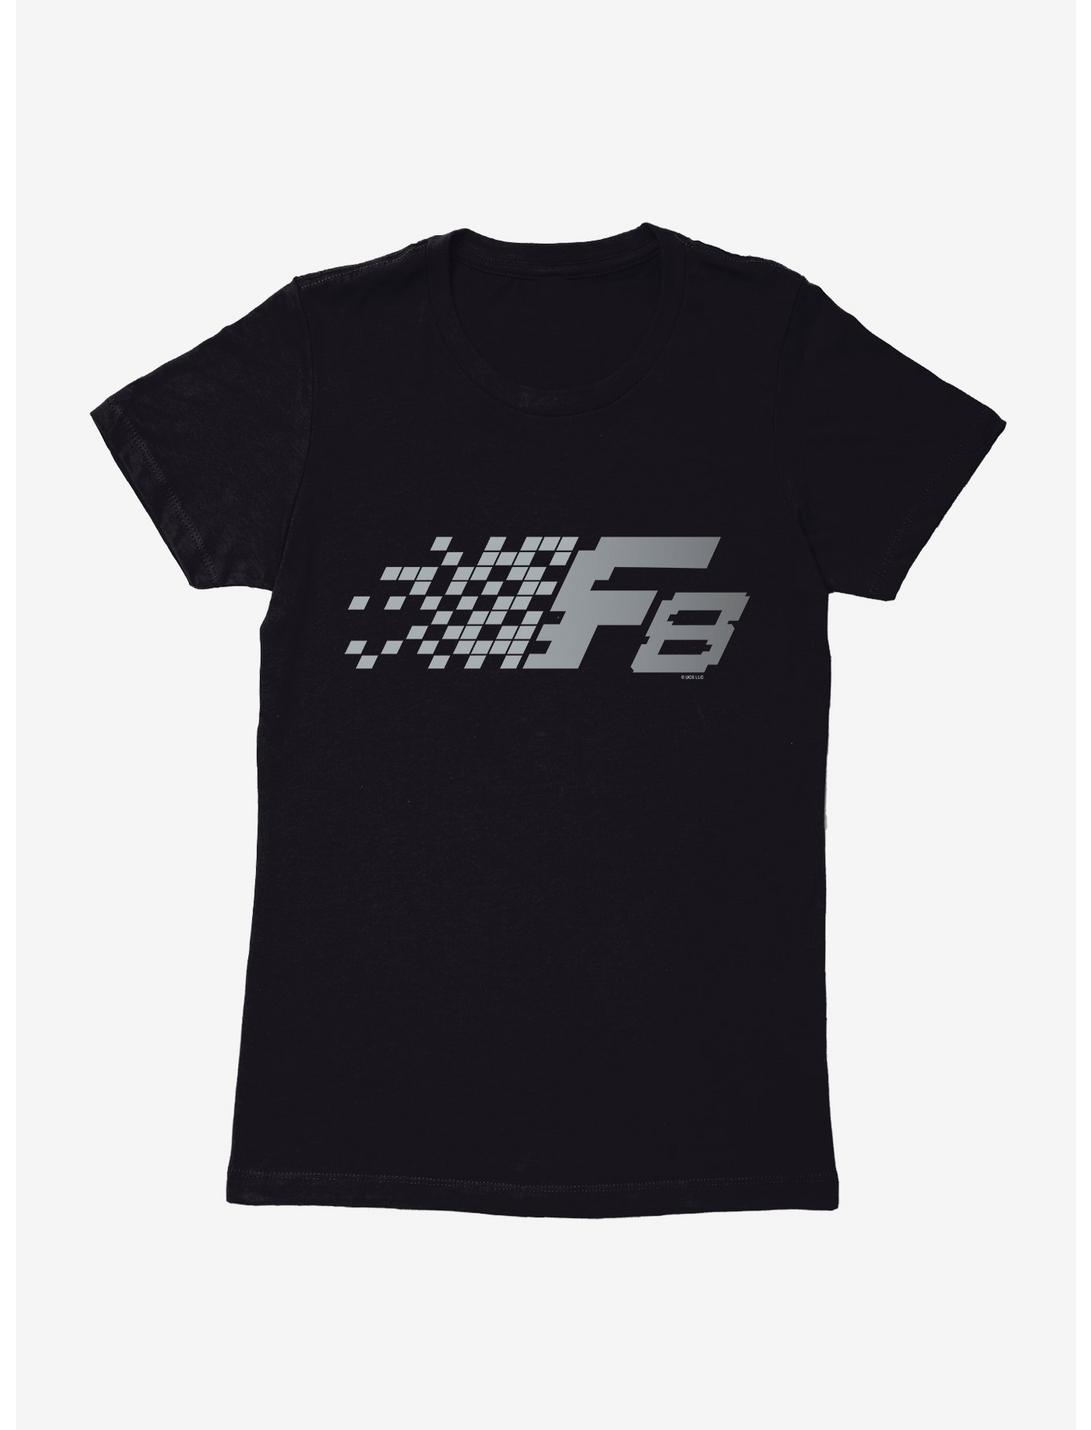 The Fate Of The Furious Gray Squared Logo Womens T-Shirt, BLACK, hi-res